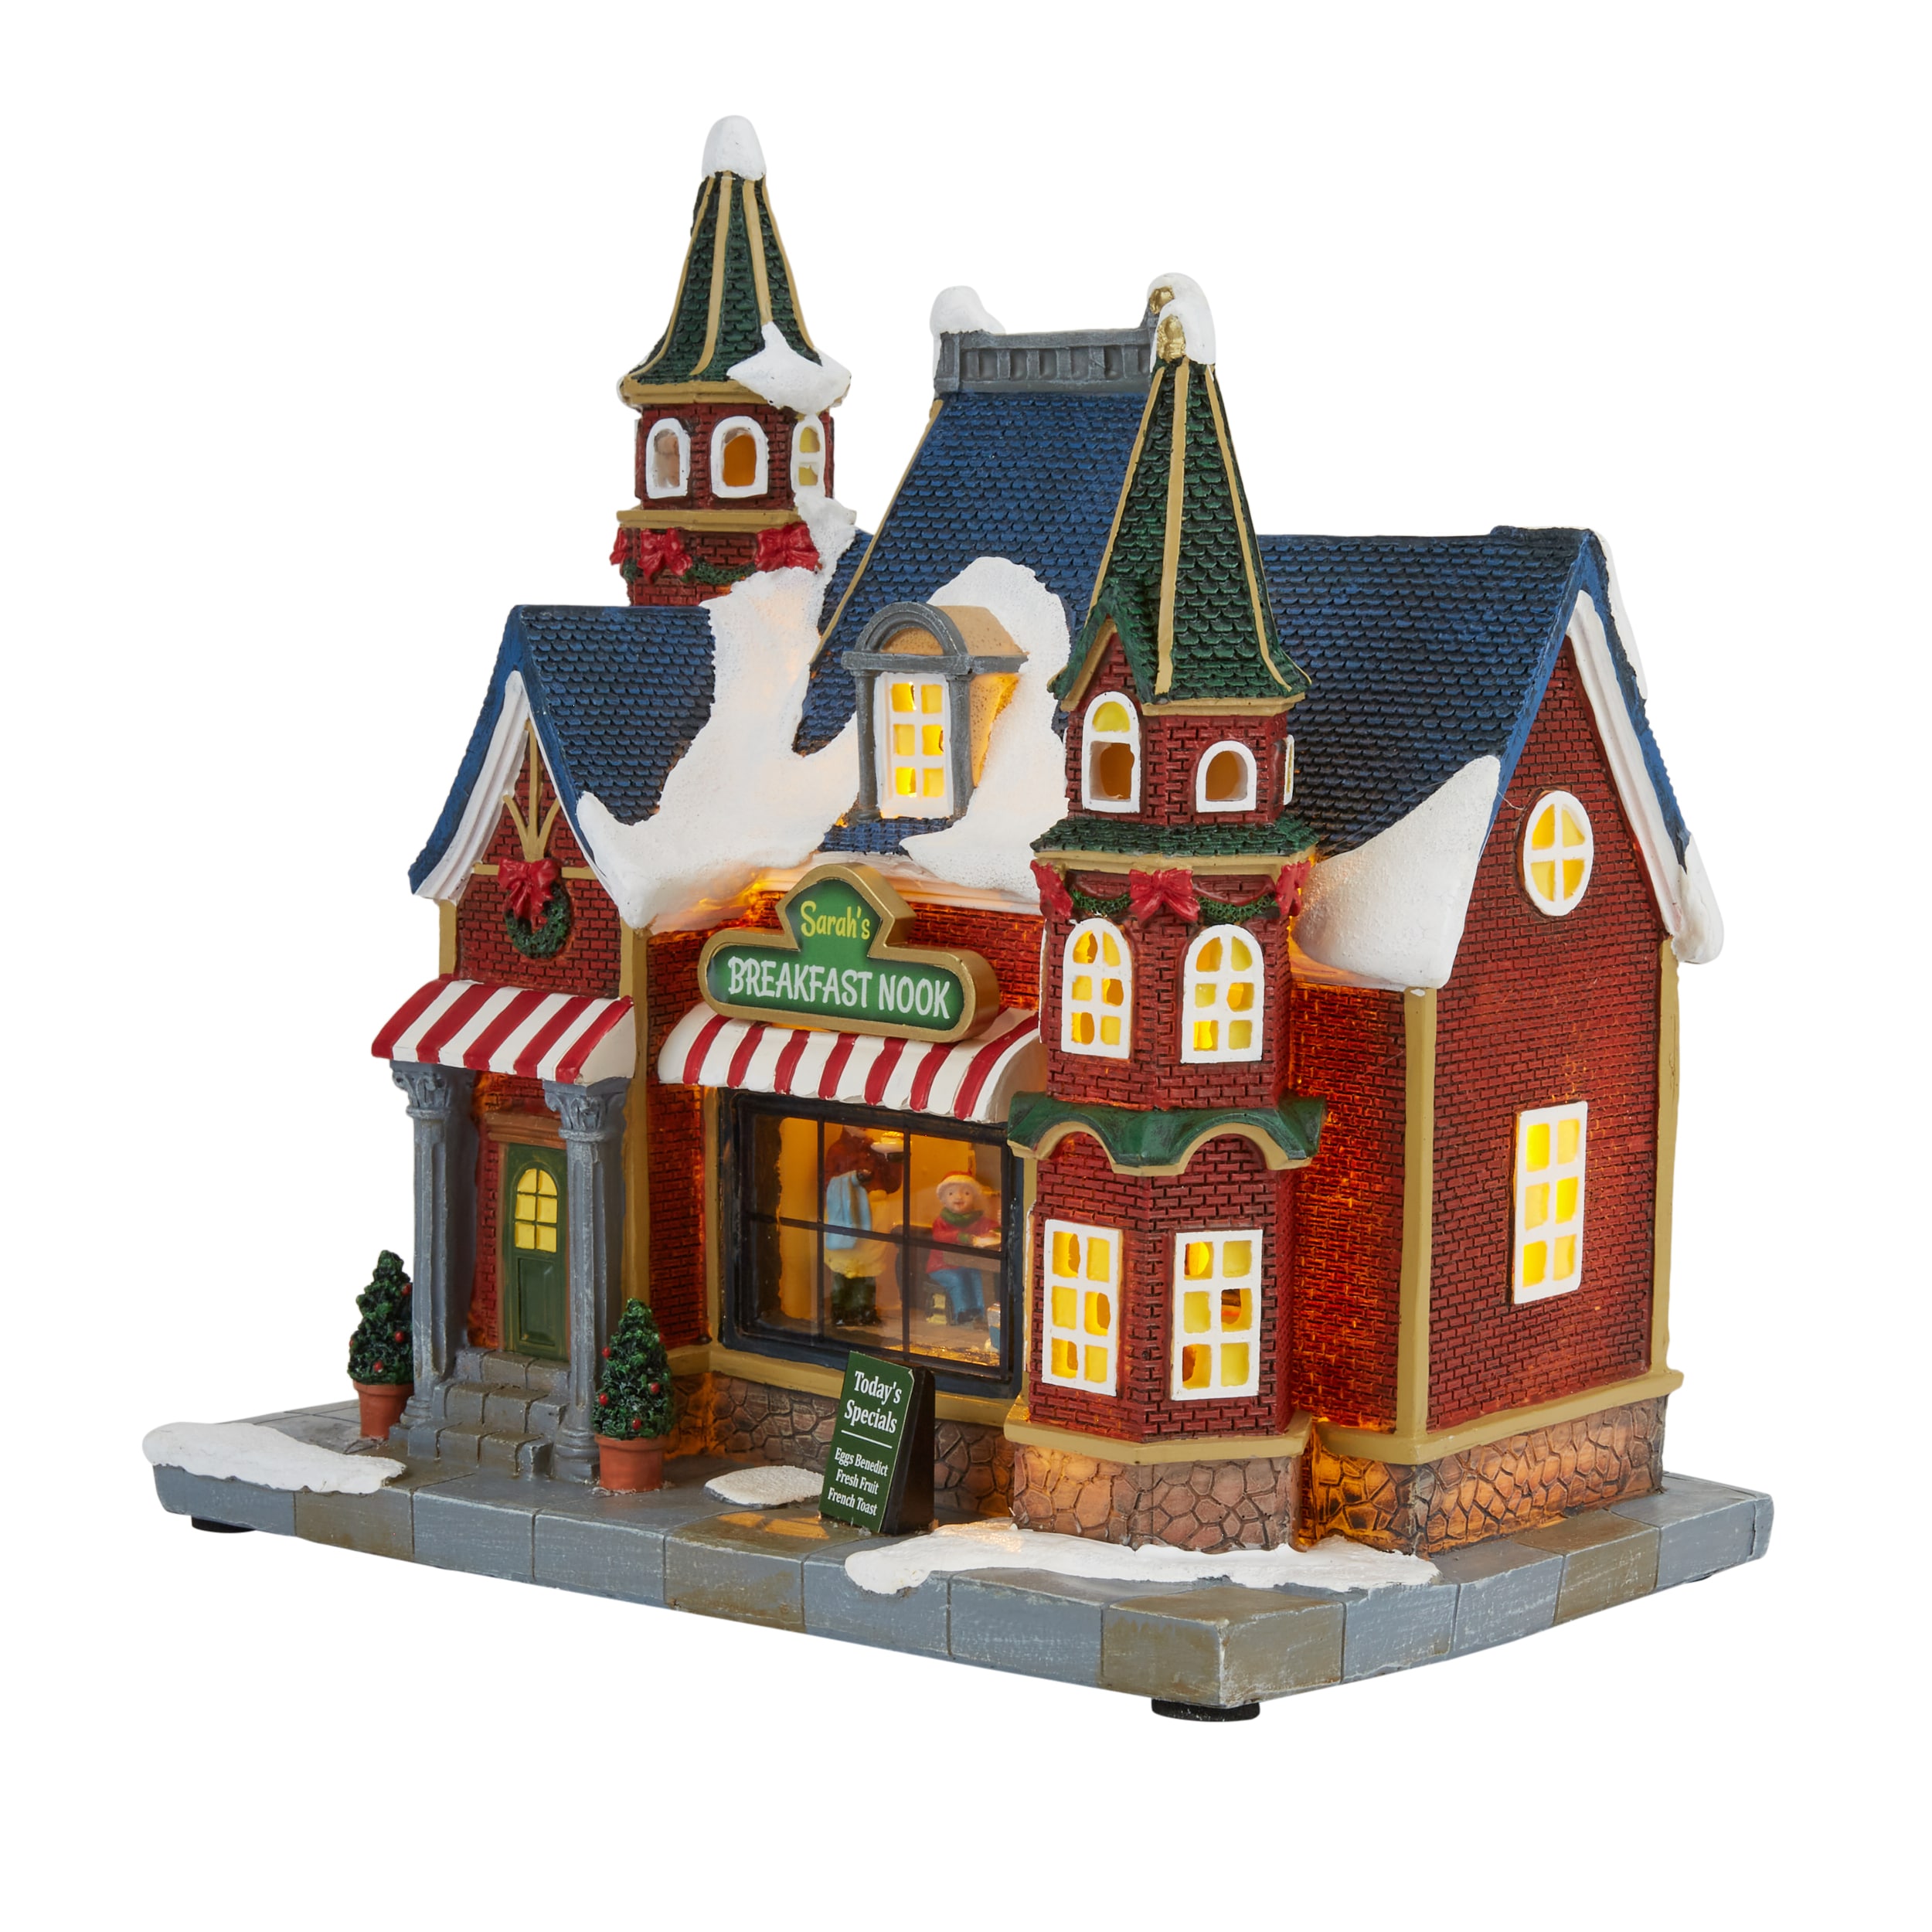 Carole Towne Sarah’S Breakfast Nook Lighted Musical Village Scene at ...